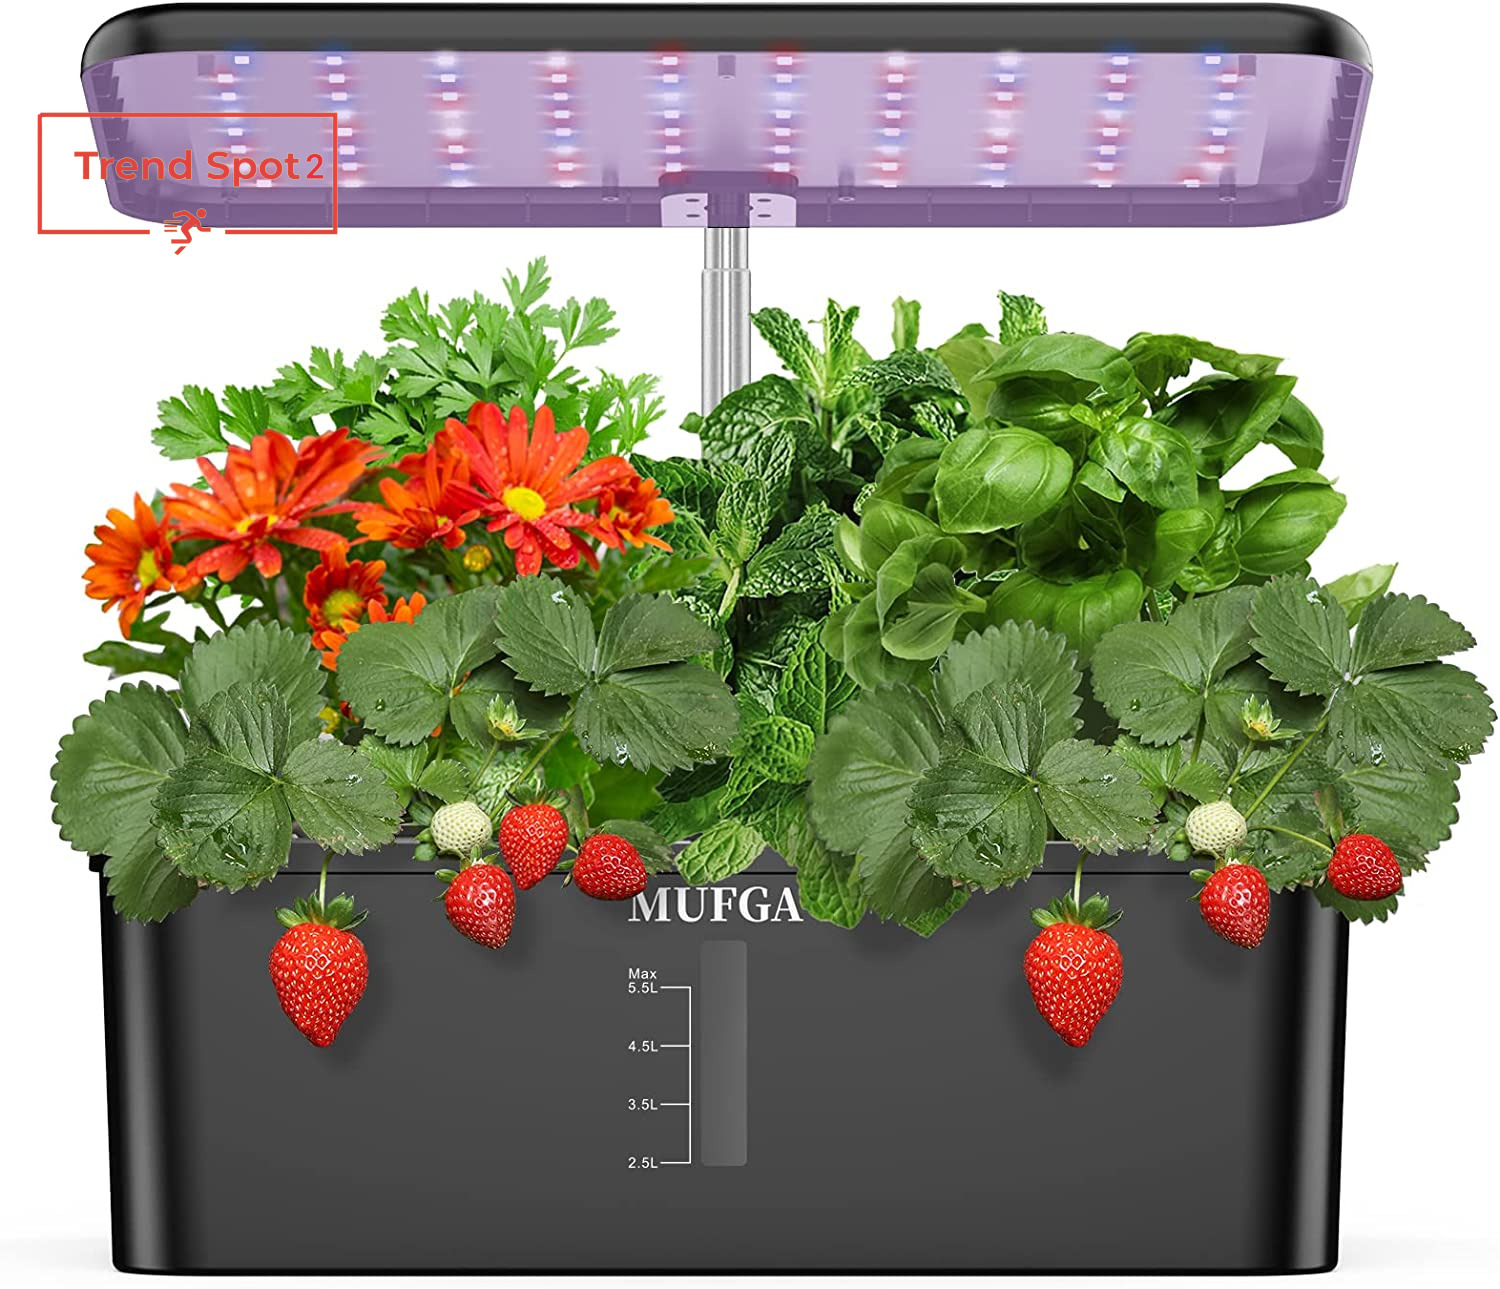 Herb Garden Hydroponics Growing System -  12 Pods Indoor Gardening System with L